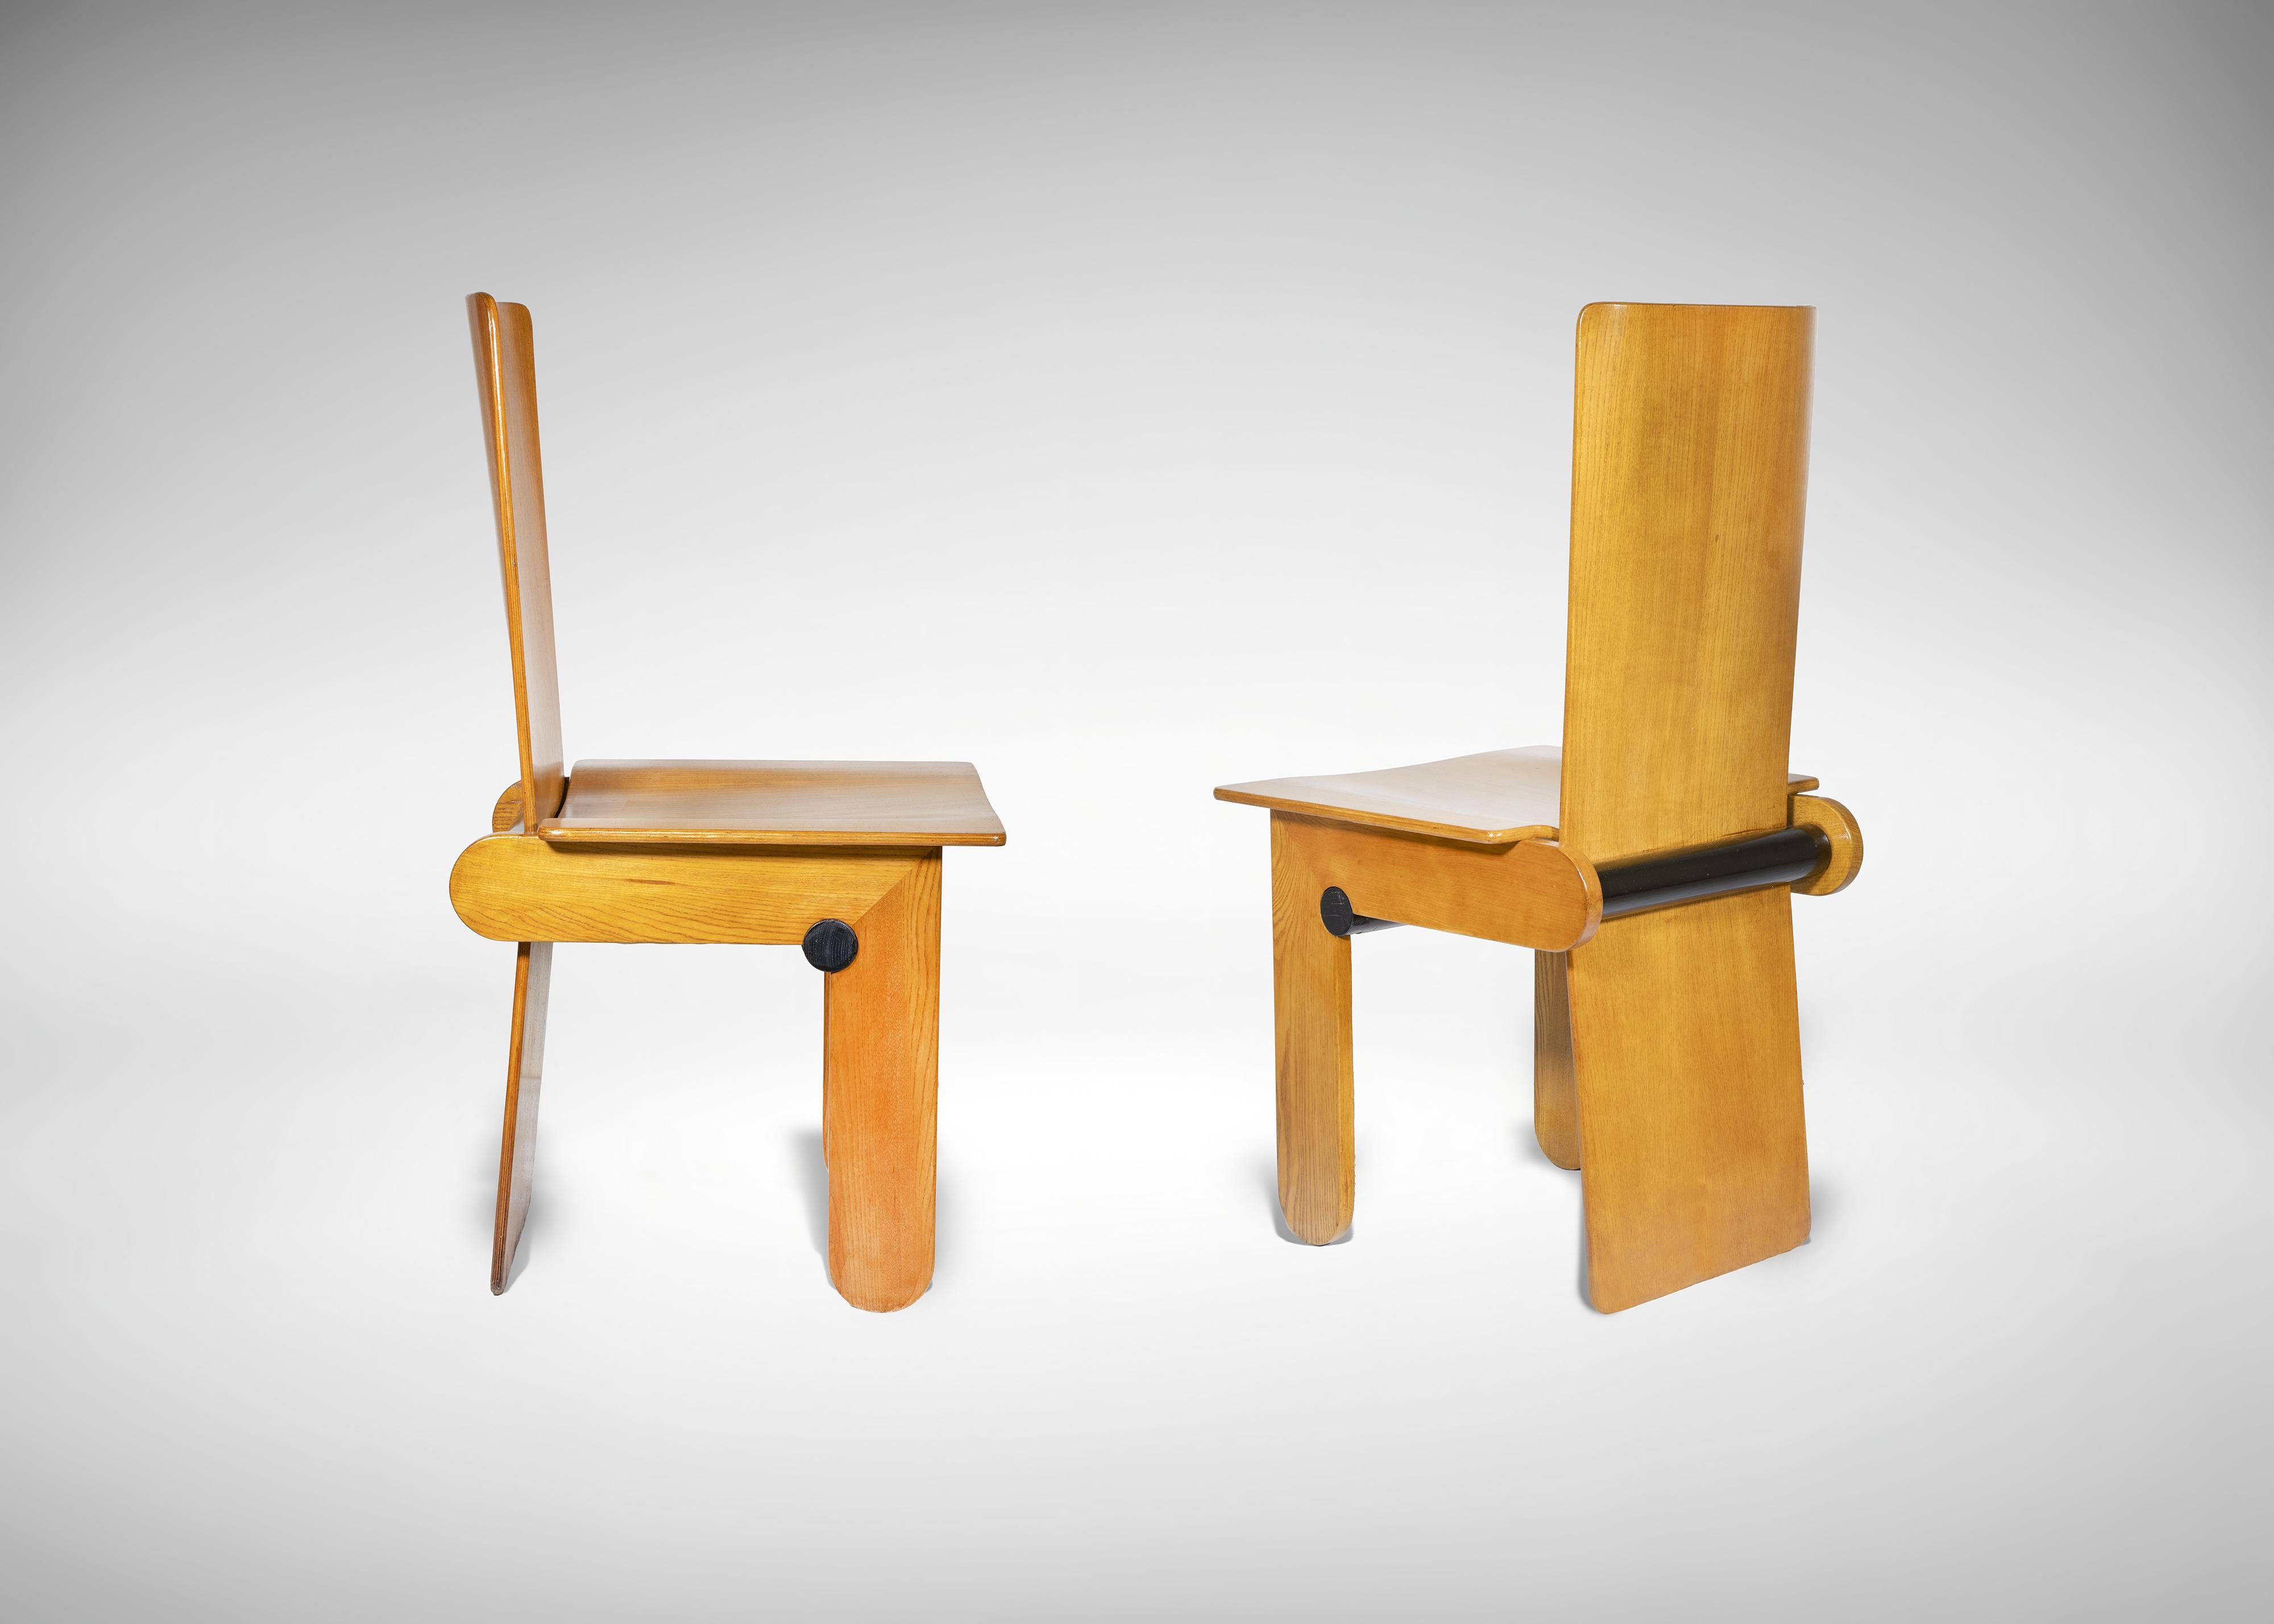 Two vintage oak wood chairs by Carlo Scarpa for Gavina.
Italy 1974.
Excellent condition.
